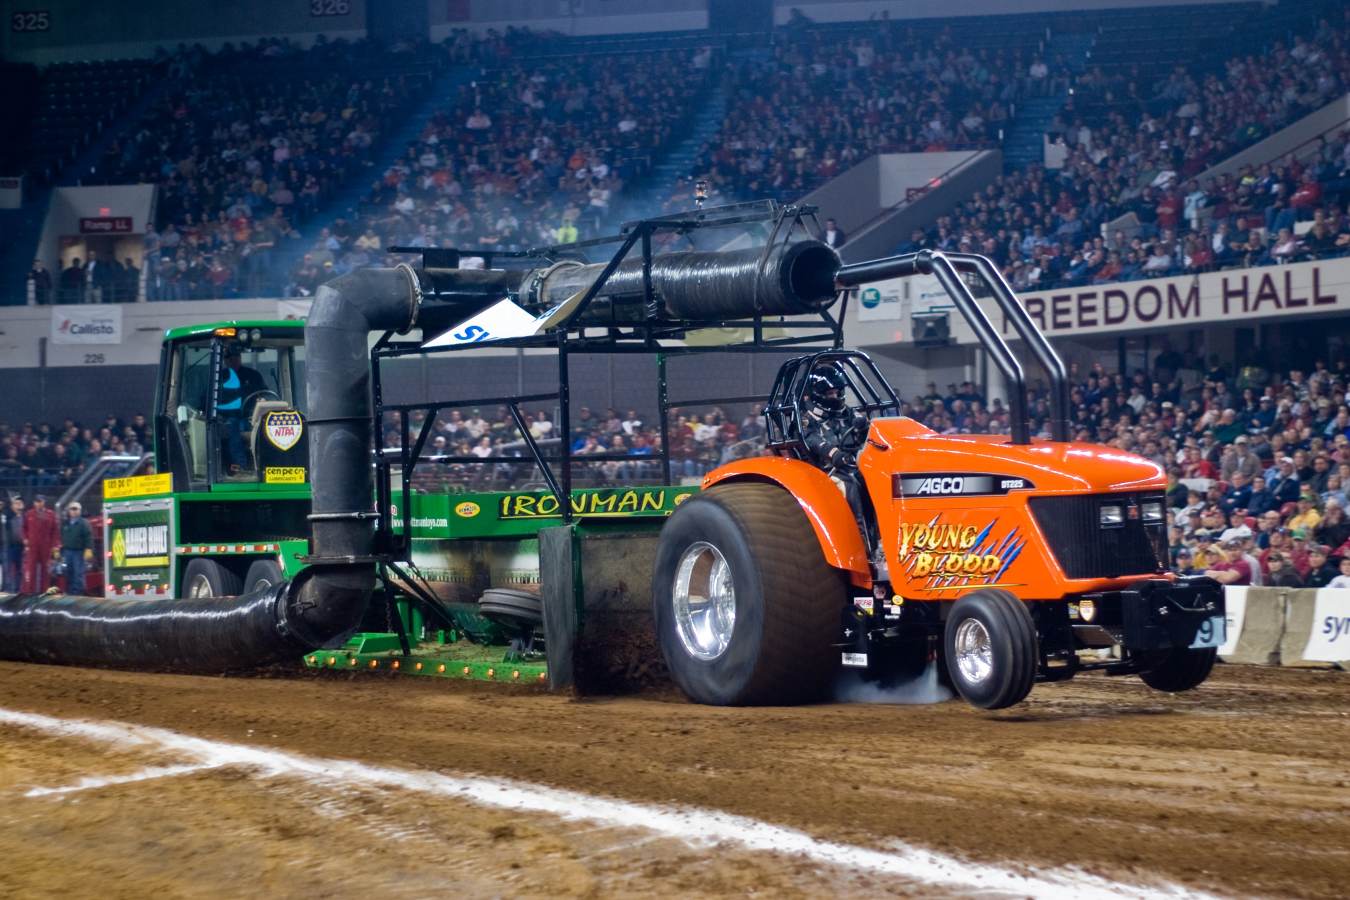 Annual National Farm Machinery Show and Championship Tractor Pull Roar